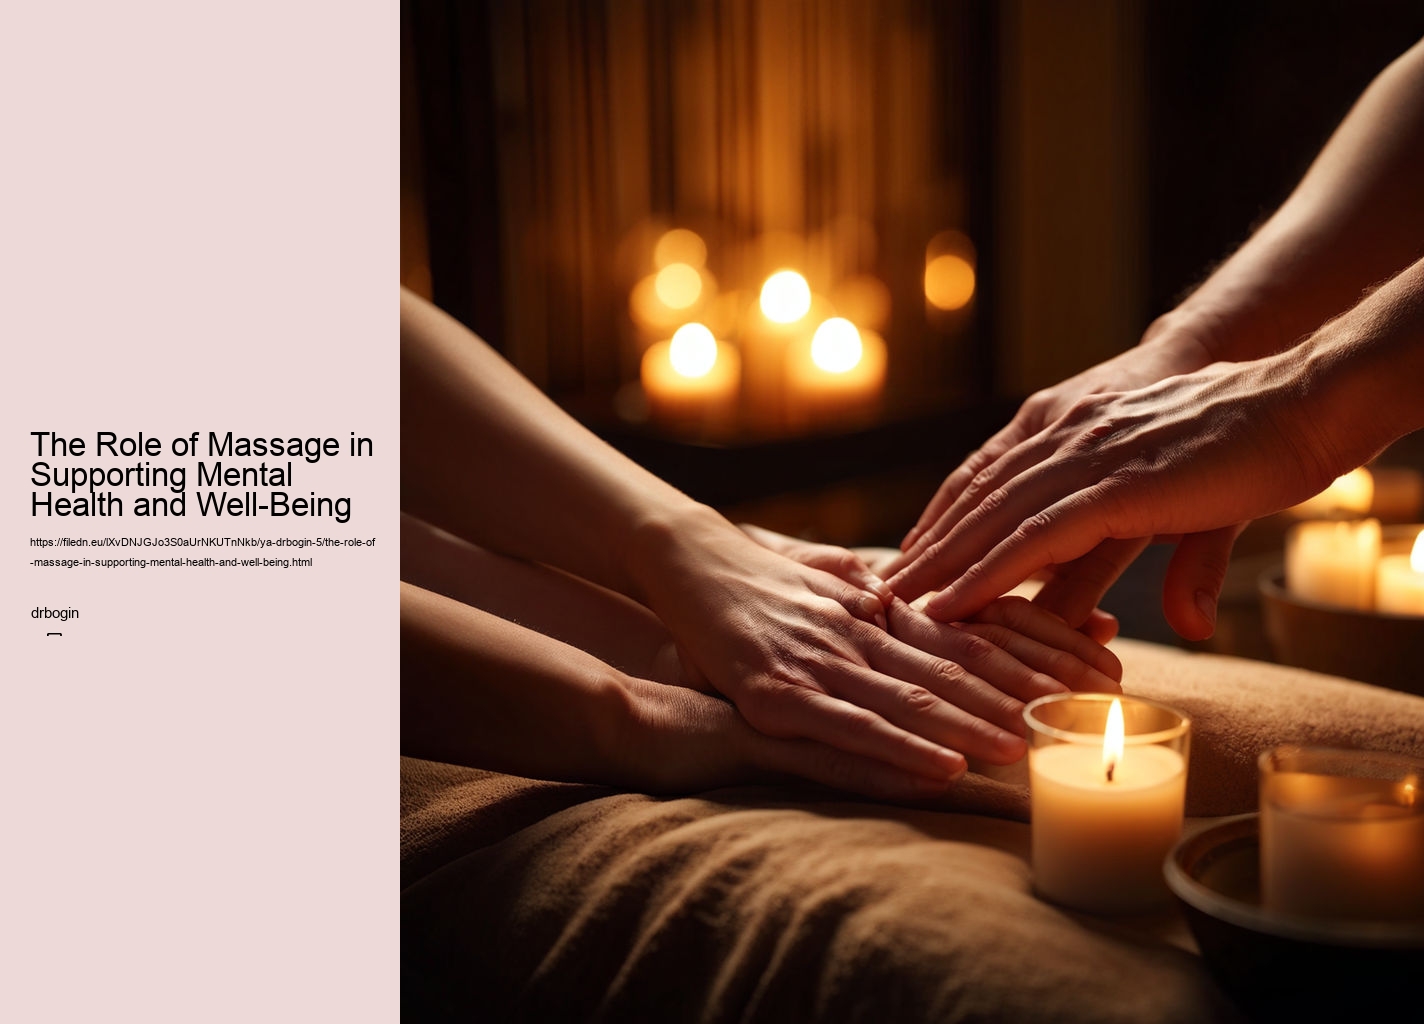 The Role of Massage in Supporting Mental Health and Well-Being